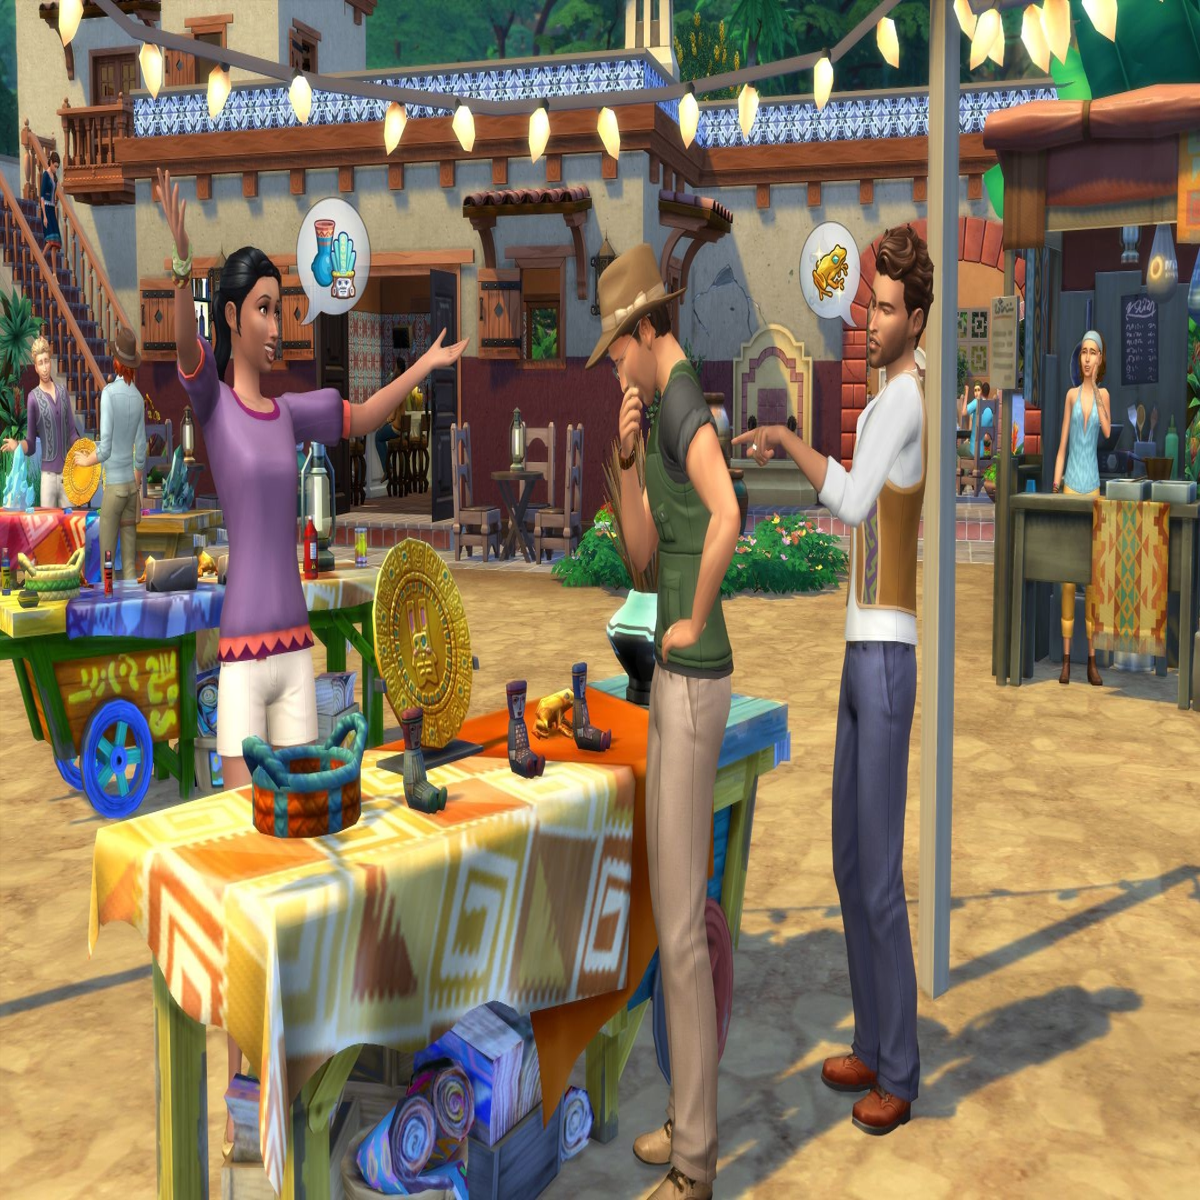 Sims 4 is now FREE on Origin for a Limited Time only –